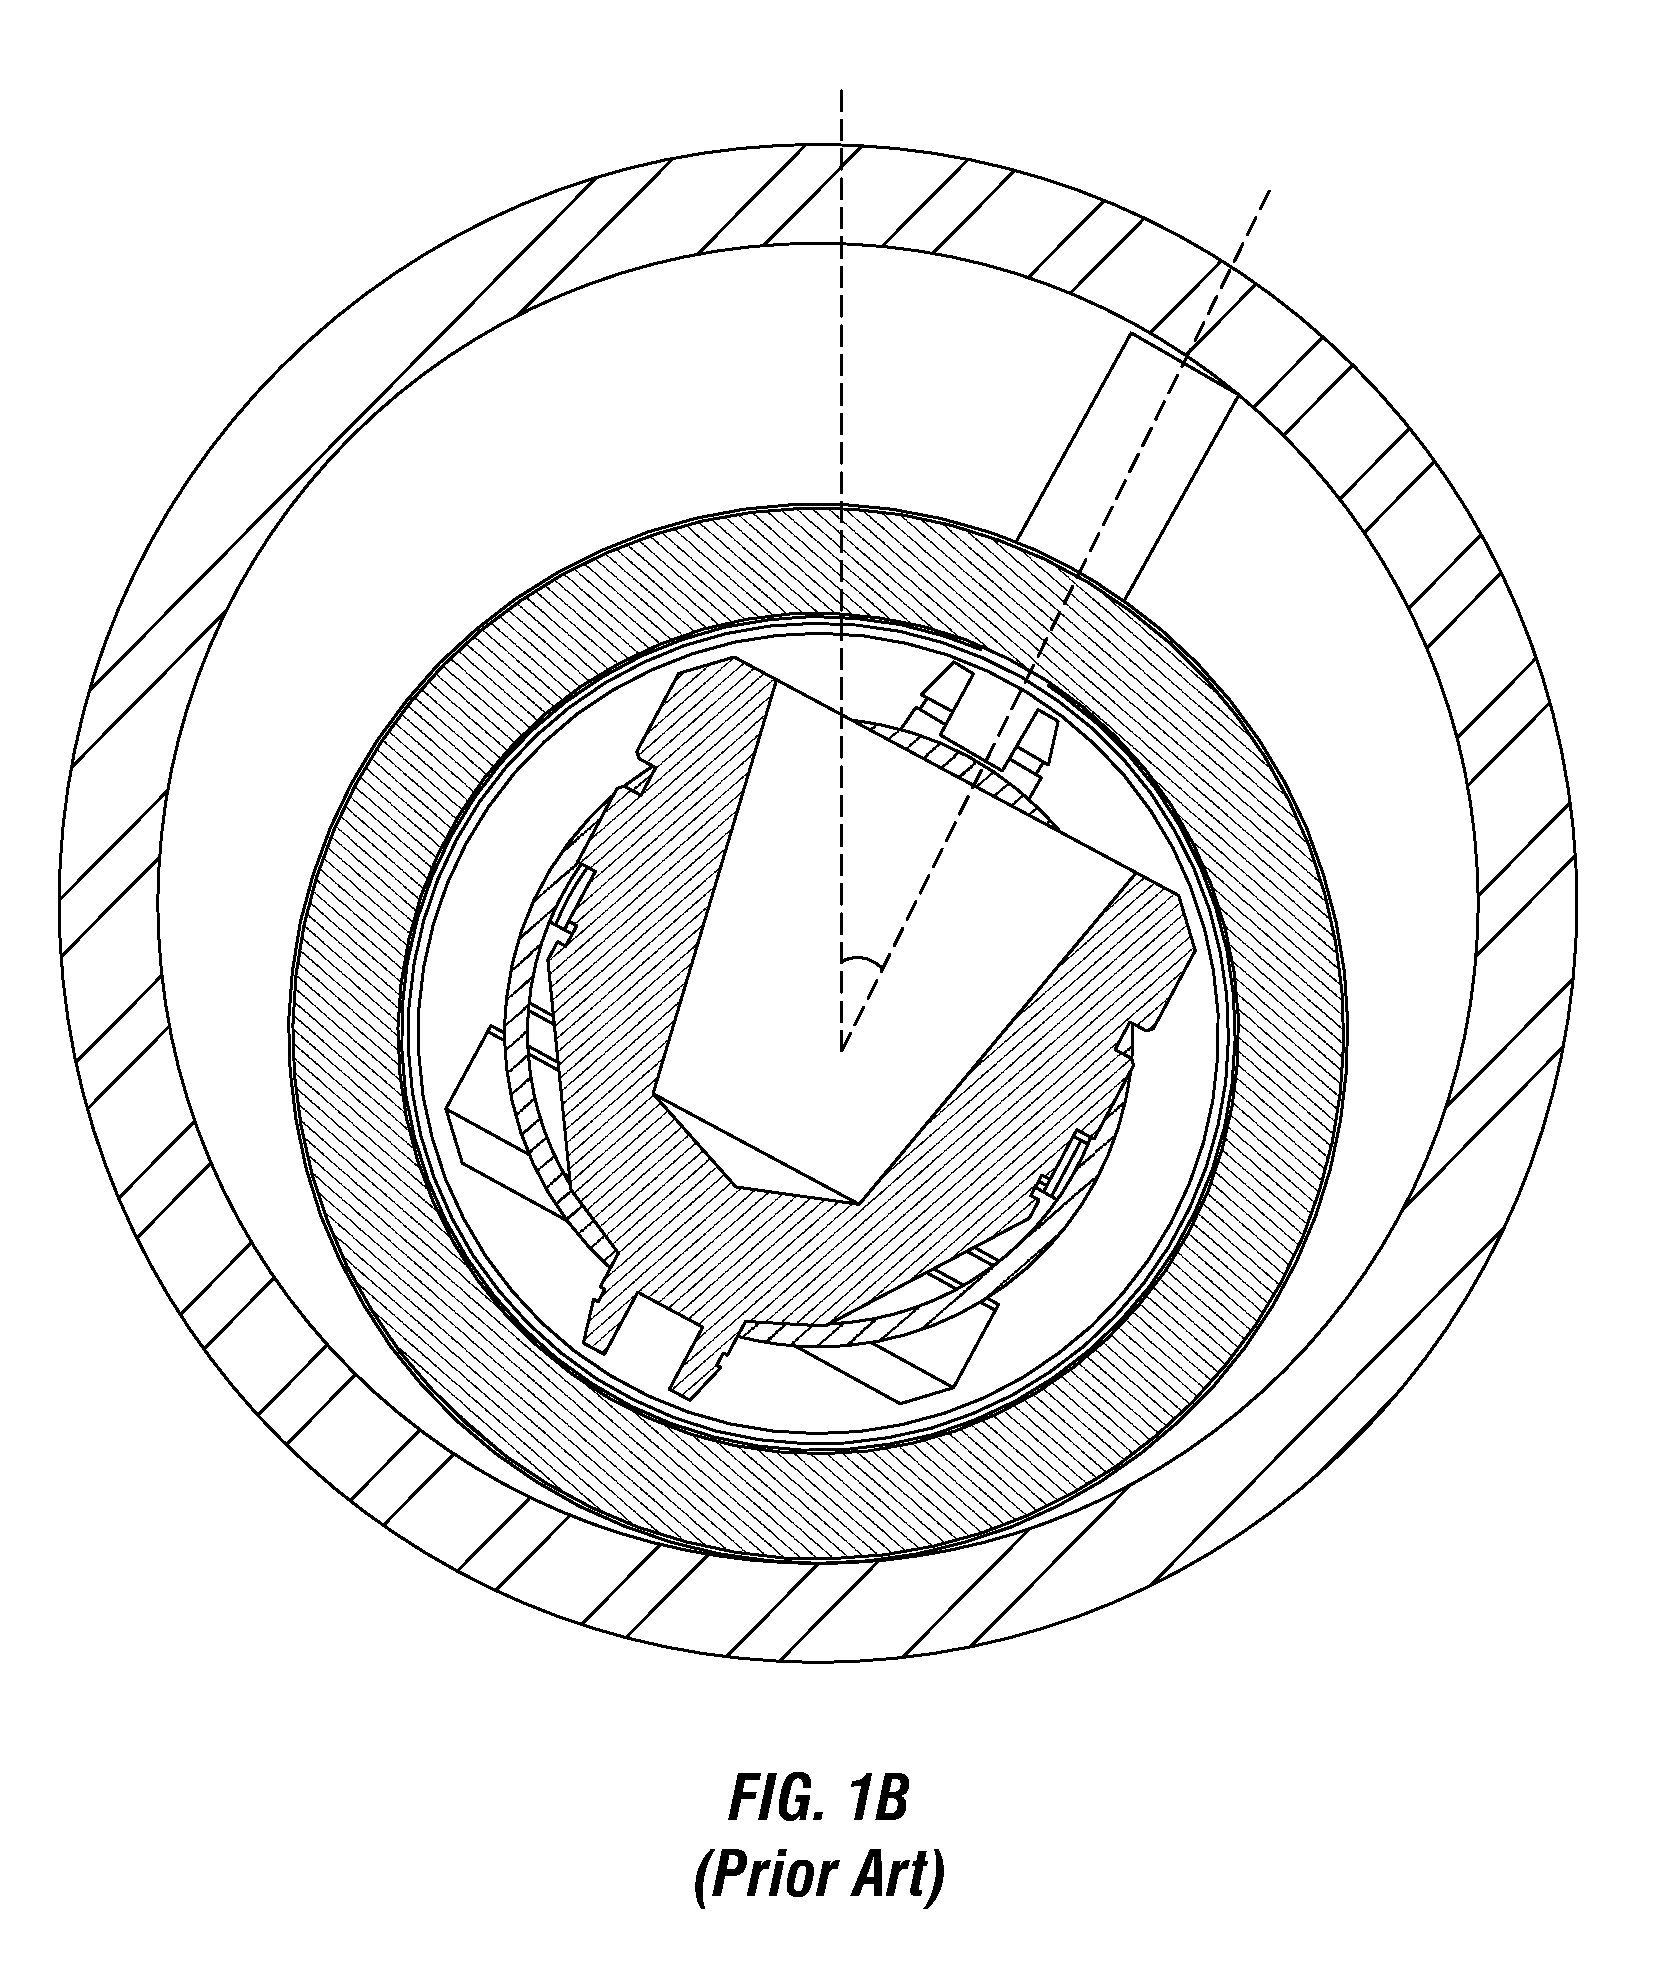 Externally-orientated internally-corrected perforating gun system and method